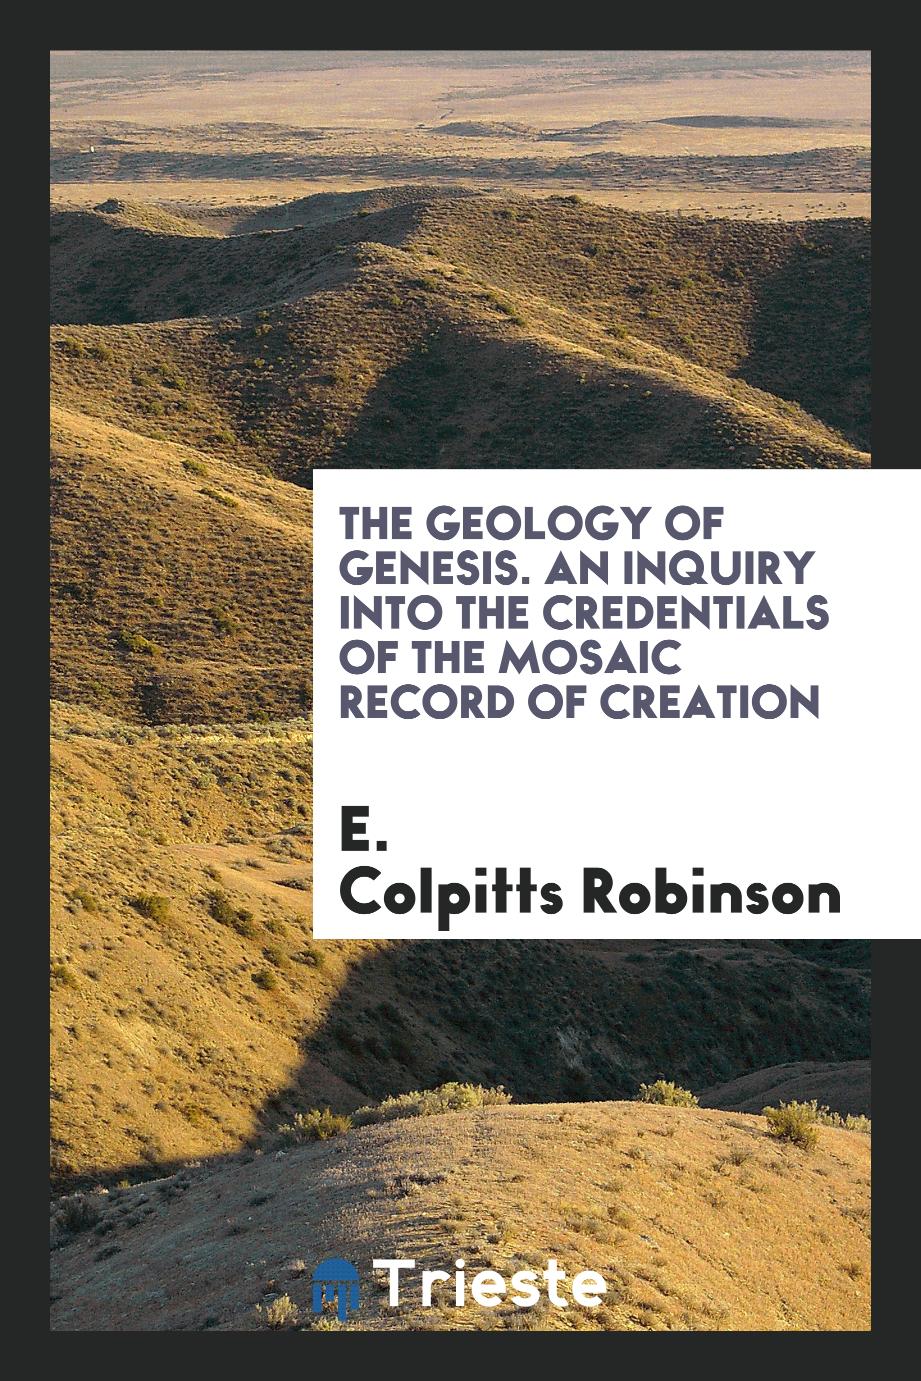 The Geology of Genesis. An Inquiry into the Credentials of the Mosaic Record of Creation